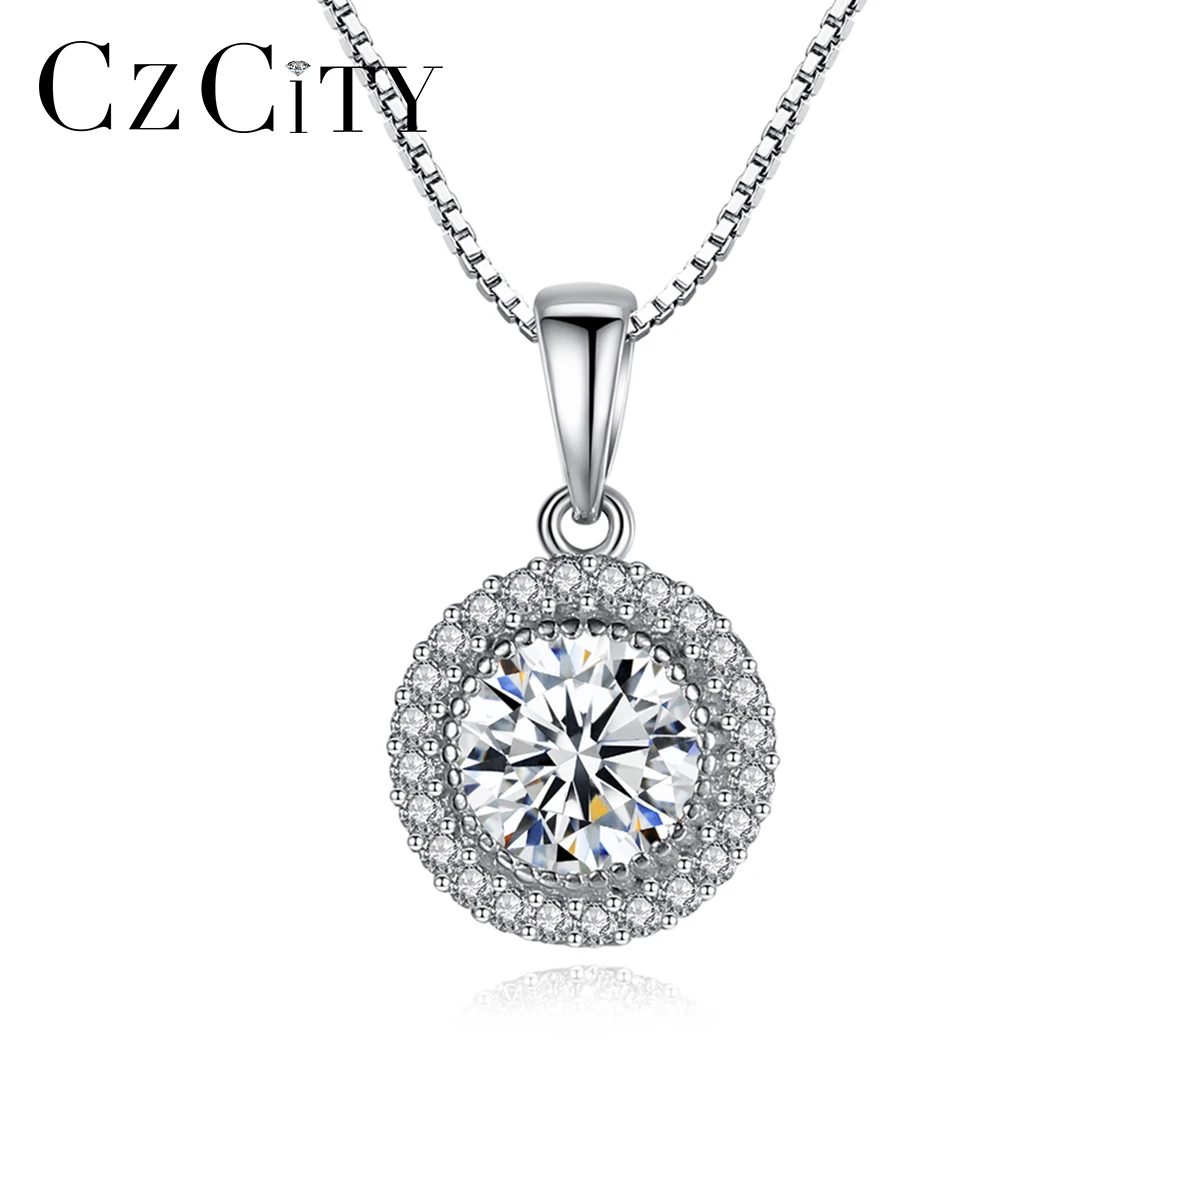 

CZCITY Cubic Zirconia Halo Silver Pendant 925 Sterling Classic Tiny CZ Round Pendants Chain Necklace For Women Fine Jewellery